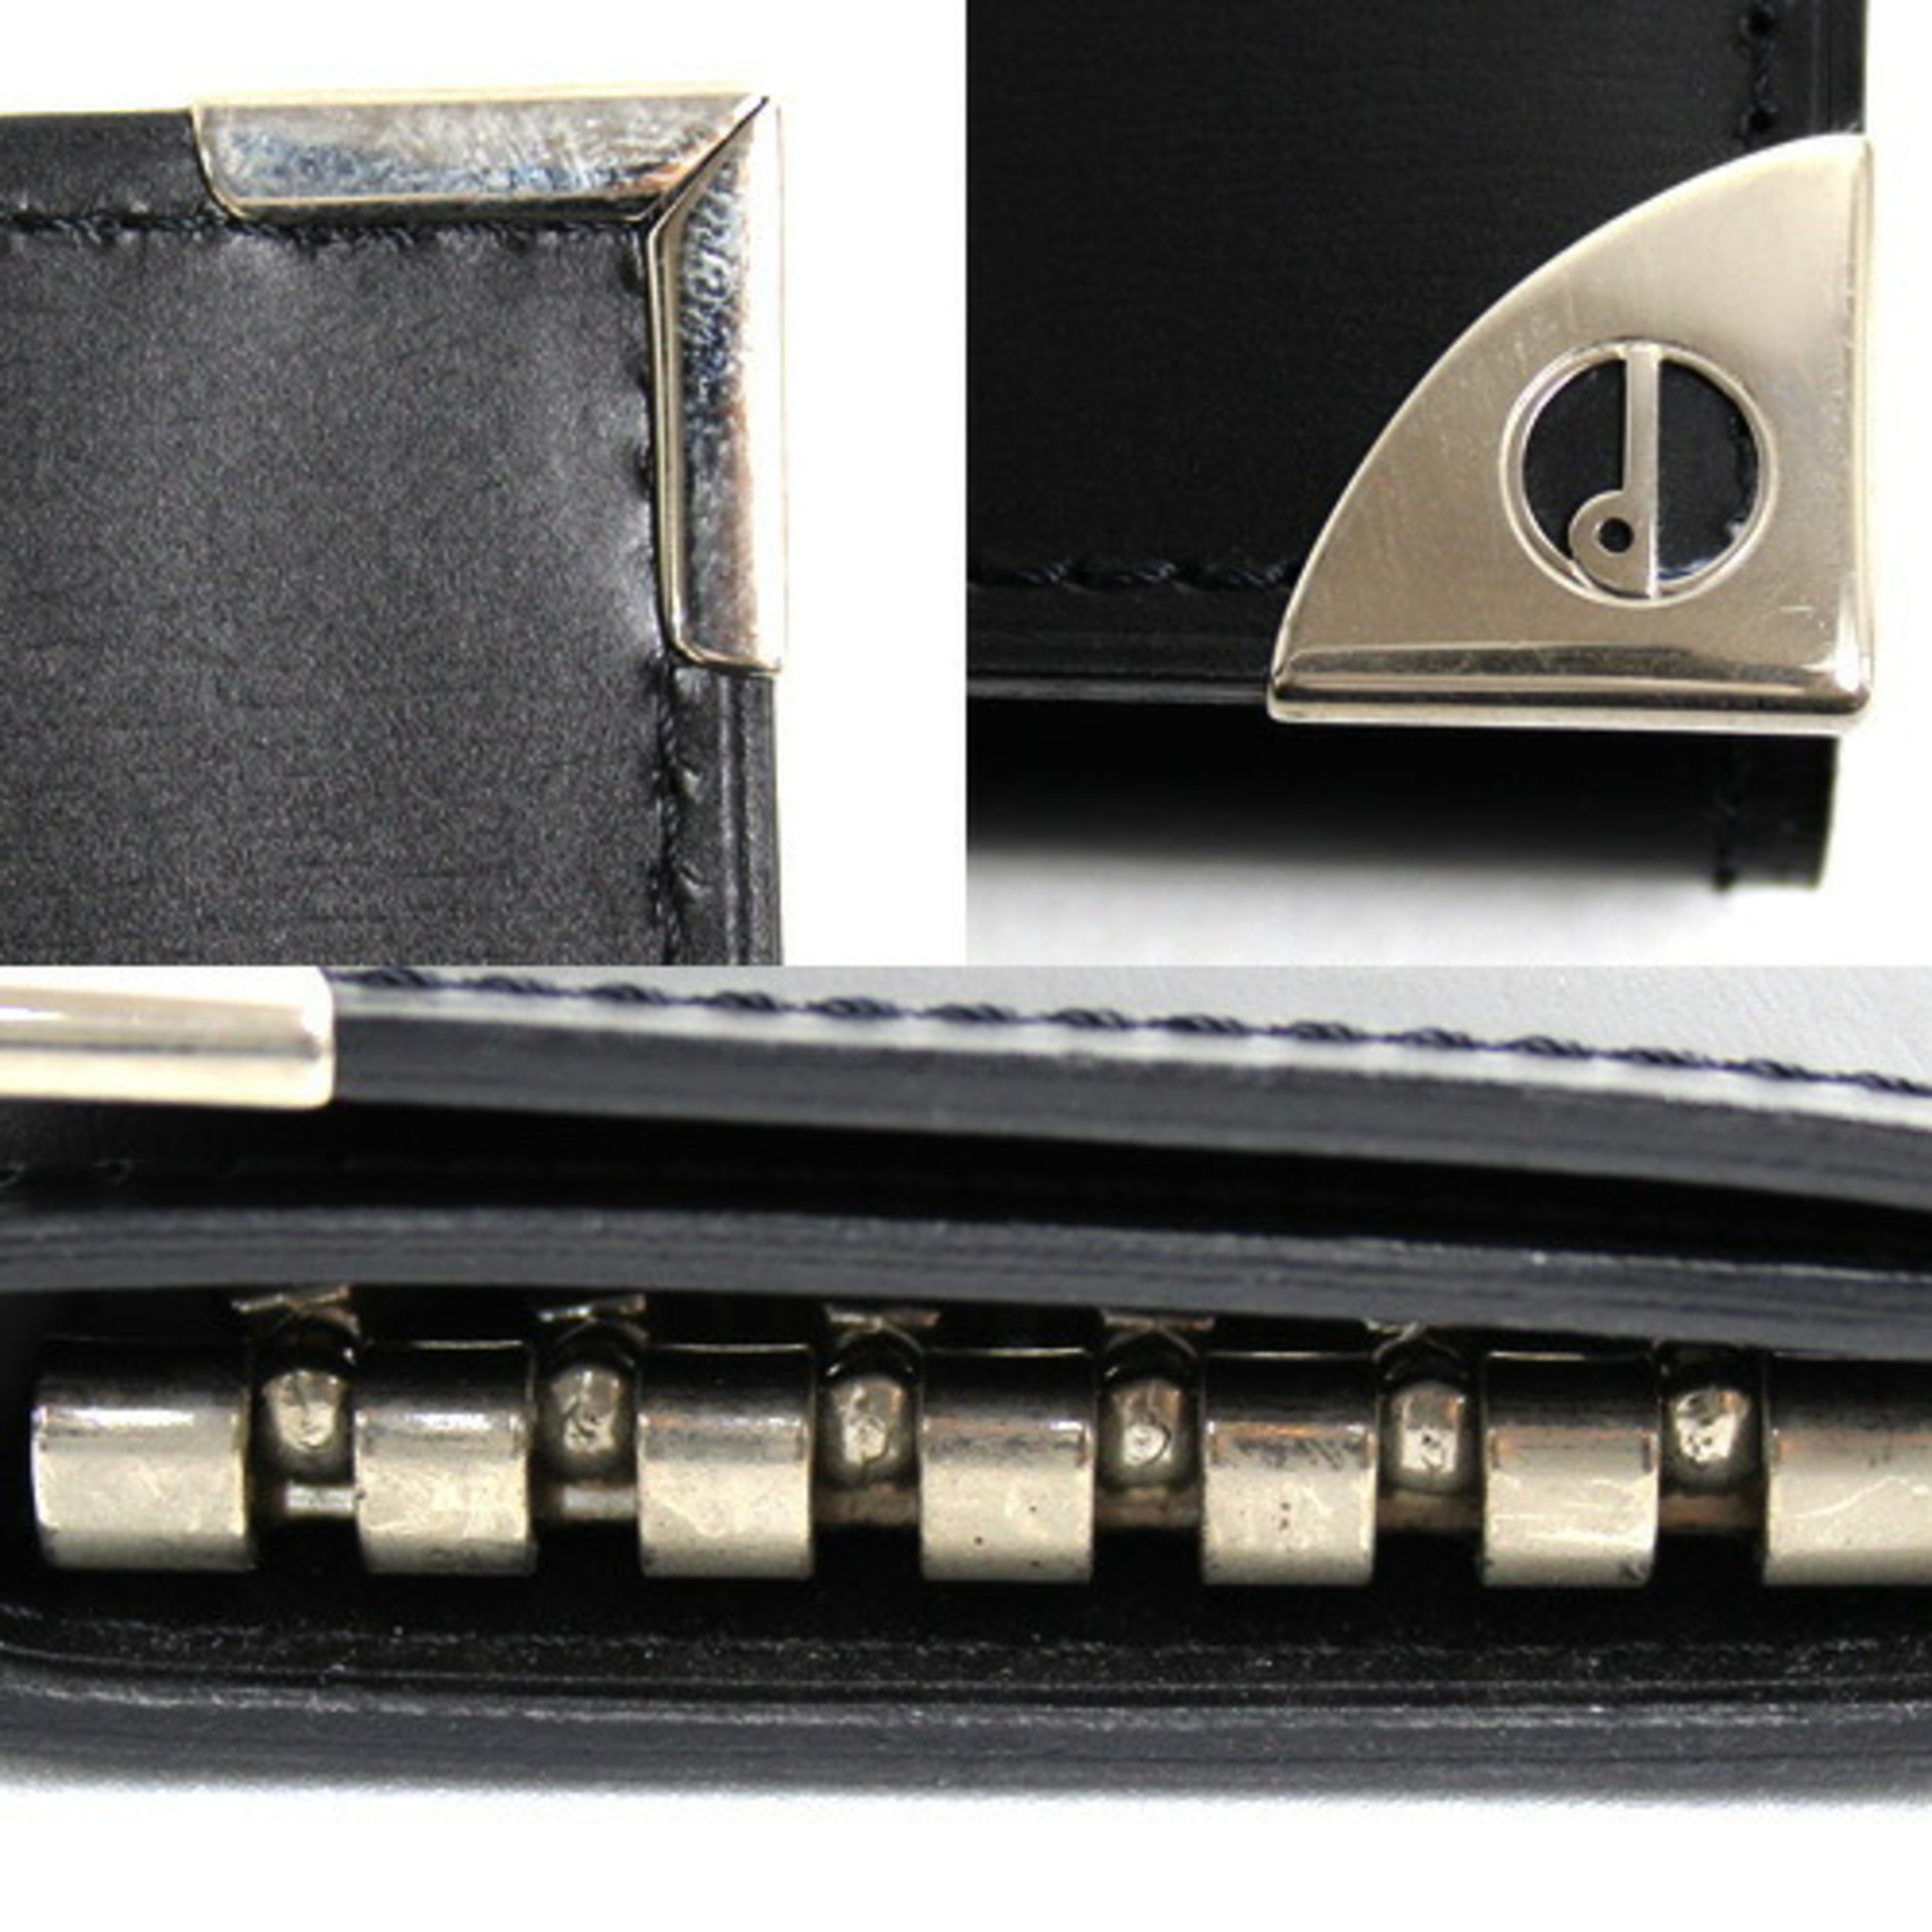 Dunhill dunhill 6 key case London style WN5000A black